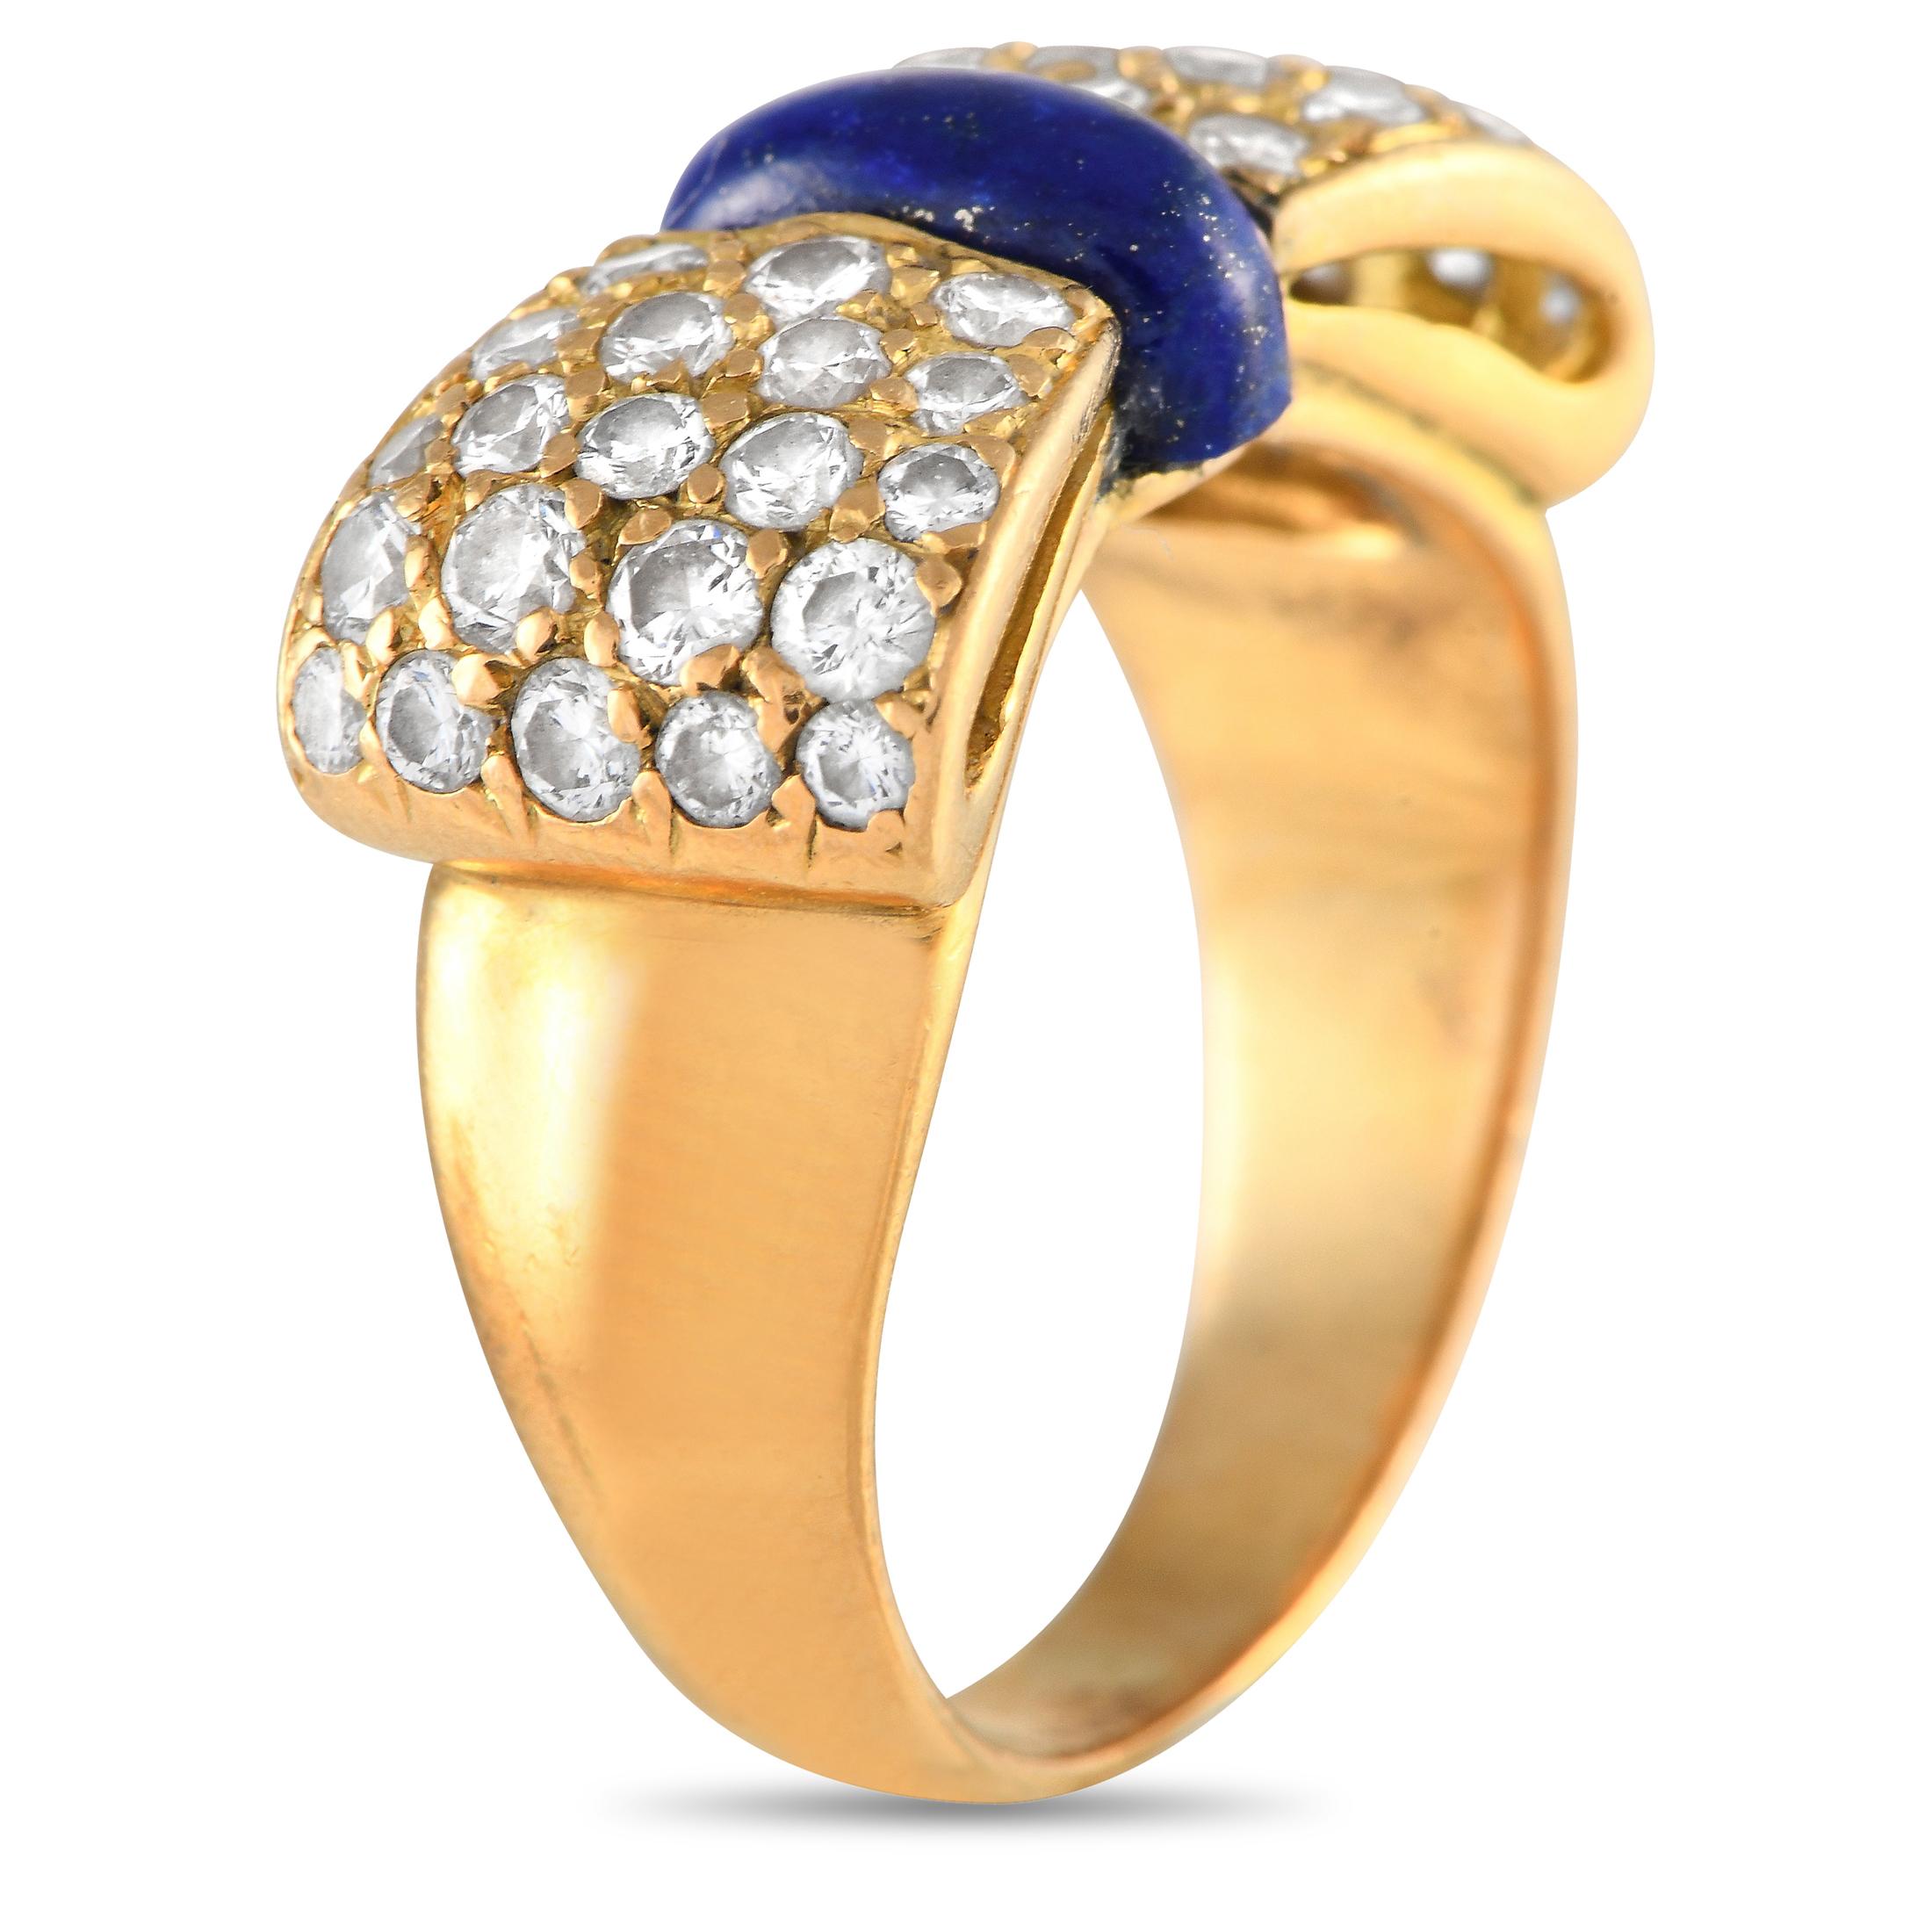 Designed to be bold and dainty at once, this Van Cleef & Arpels stunner is the perfect choice for adding personality to your looks. It features a solid 18K yellow gold domed band that widens toward the top to accommodate a bow motif. The bow's